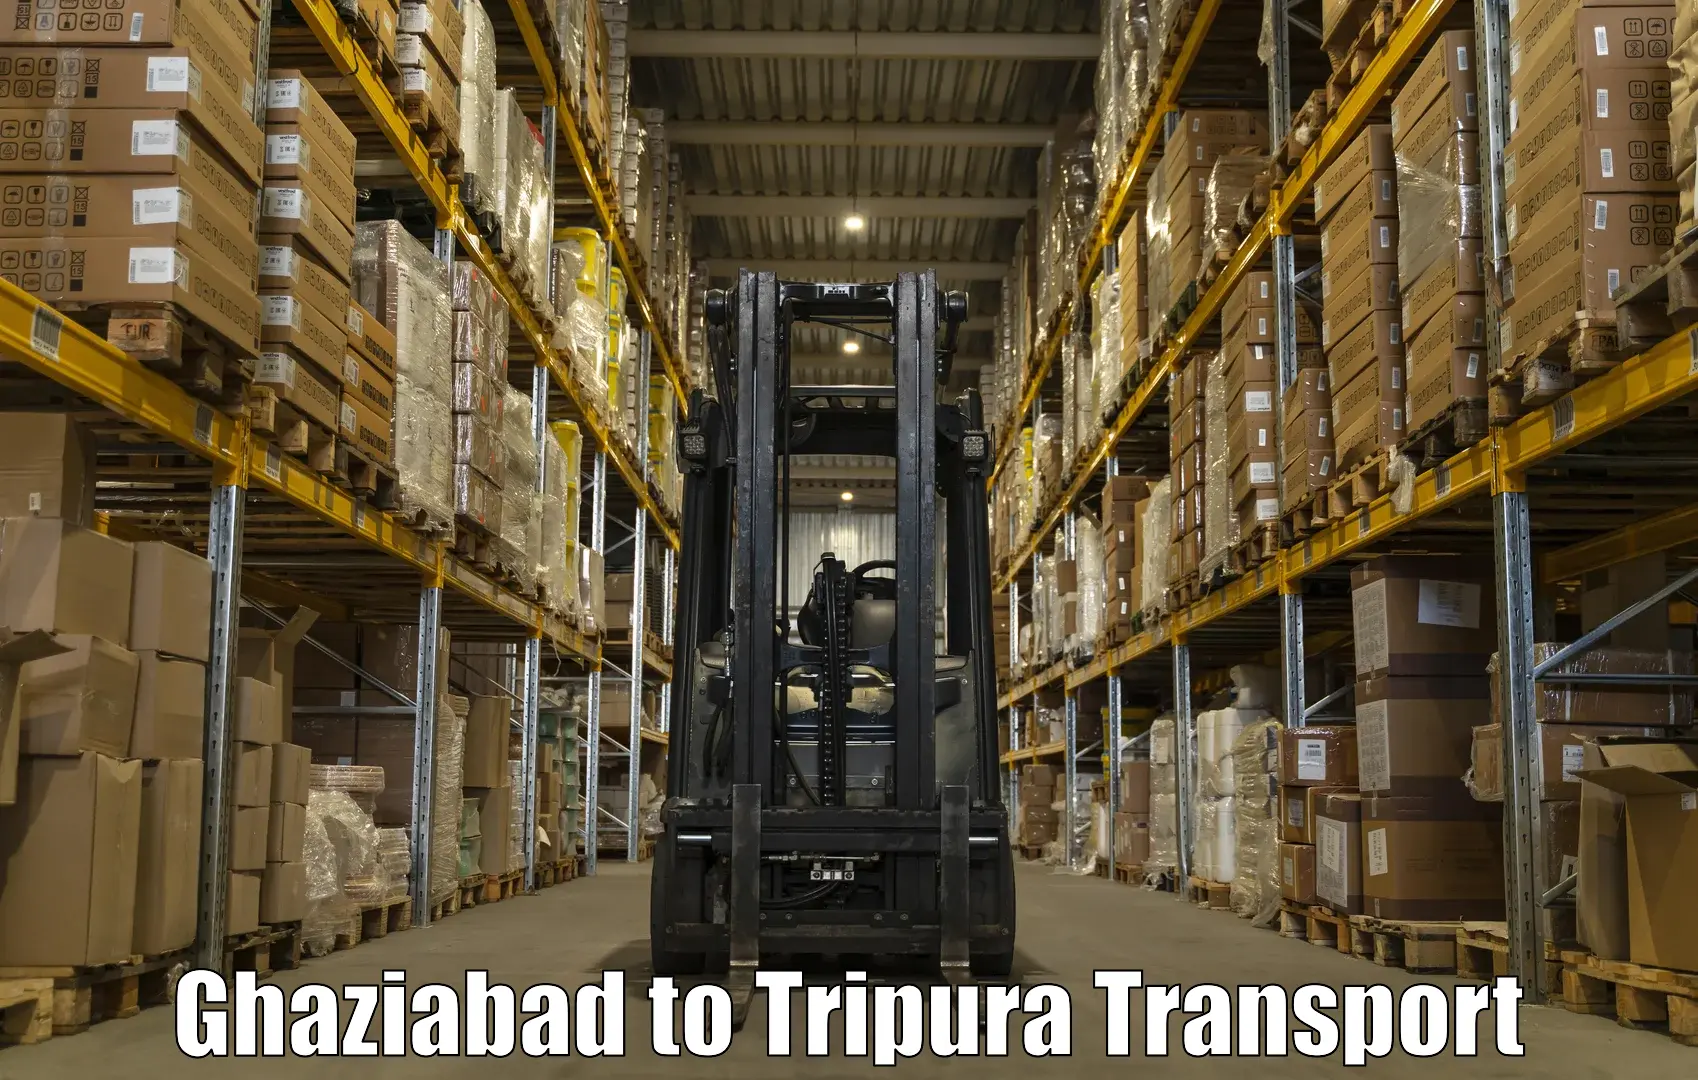 Land transport services Ghaziabad to Udaipur Tripura